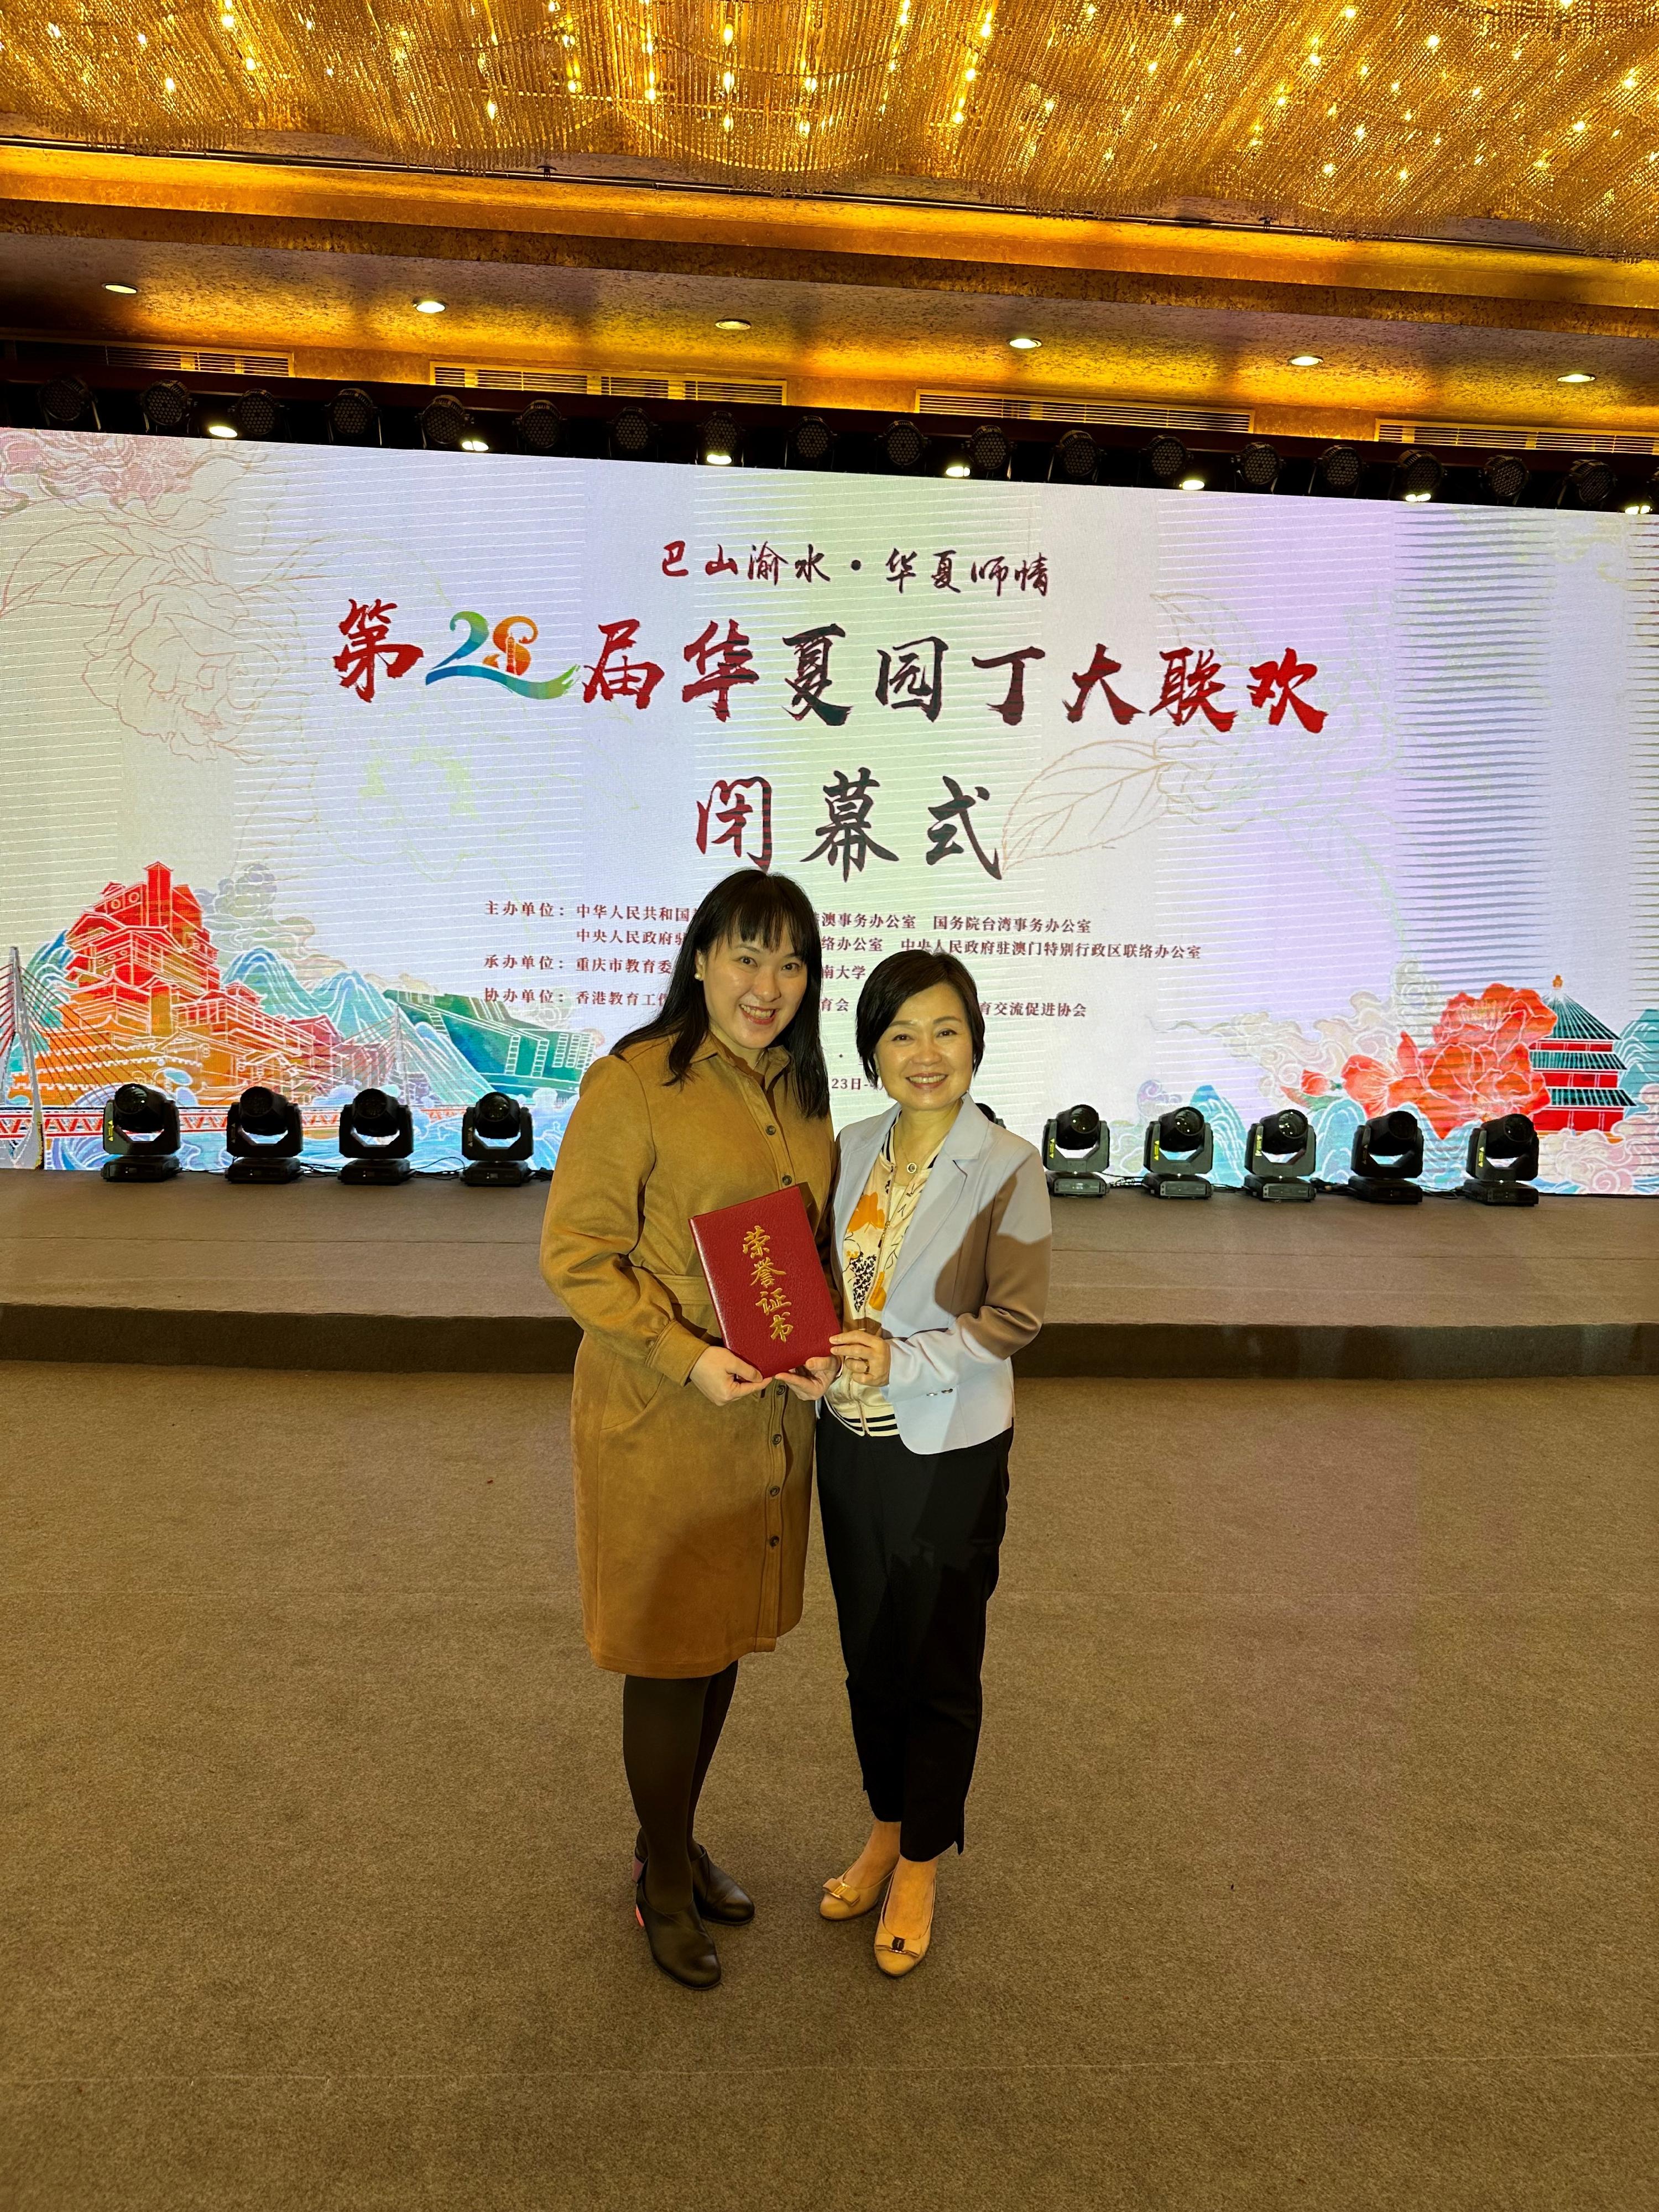 The Secretary for Education, Dr Choi Yuk-lin (right), congratulates the Principal of the Hong Kong Council of the Church of Christ in China Ming Kei College, Ms Cheung Pui-shan (left), on receiving the outstanding paper award of the Gala for Gardeners of the Chinese Nation in Chongqing today (April 27).